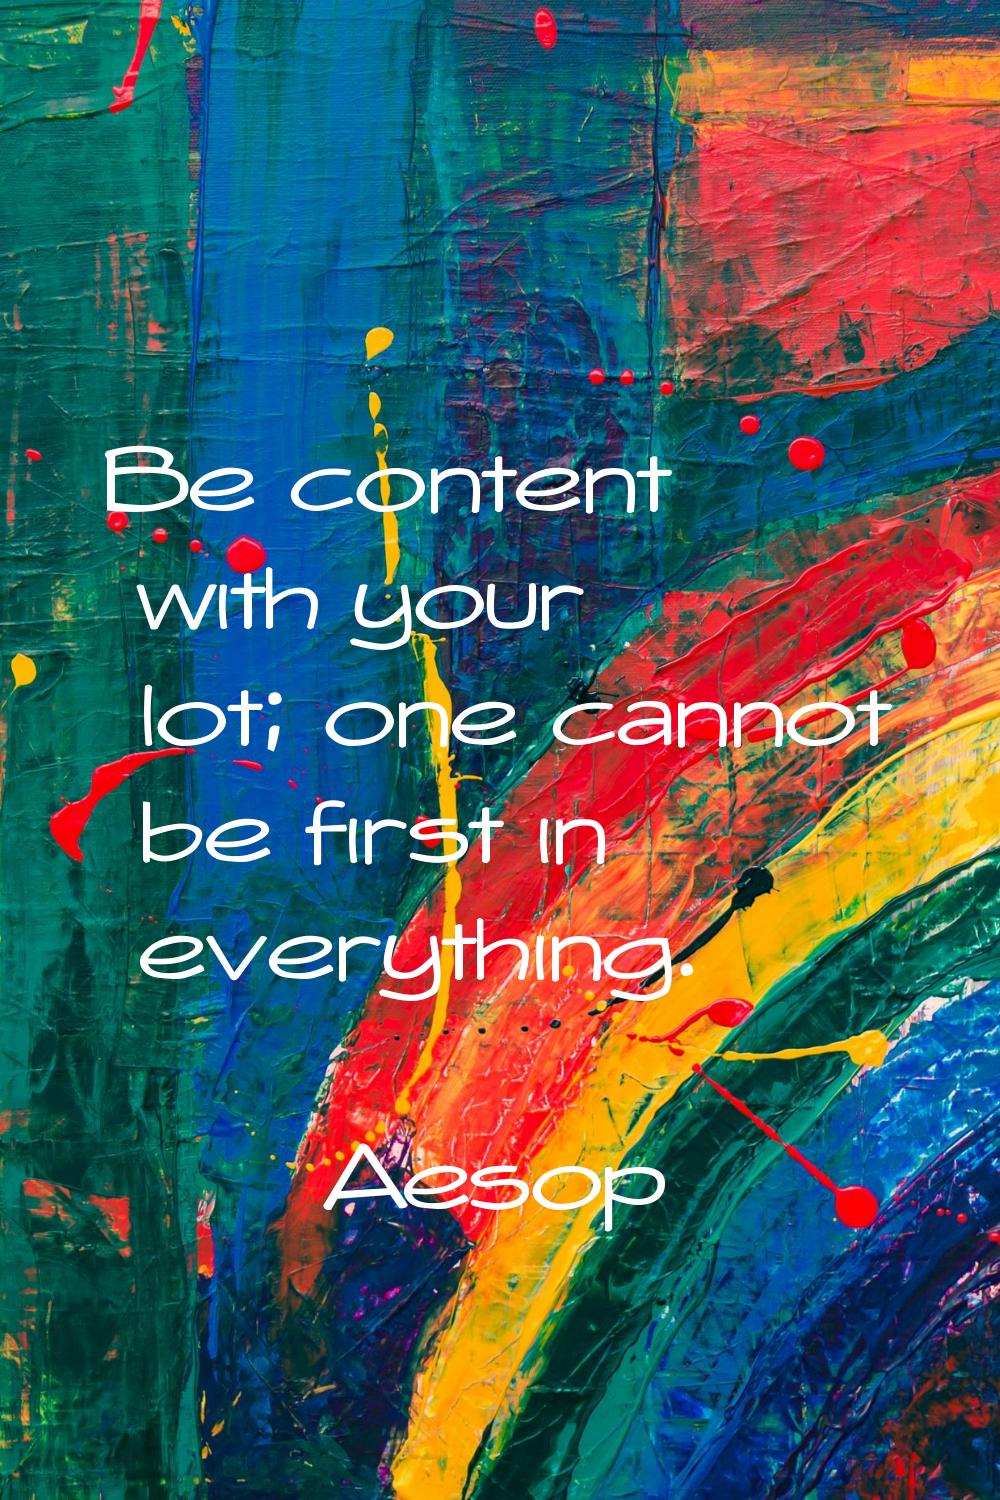 Be content with your lot; one cannot be first in everything.